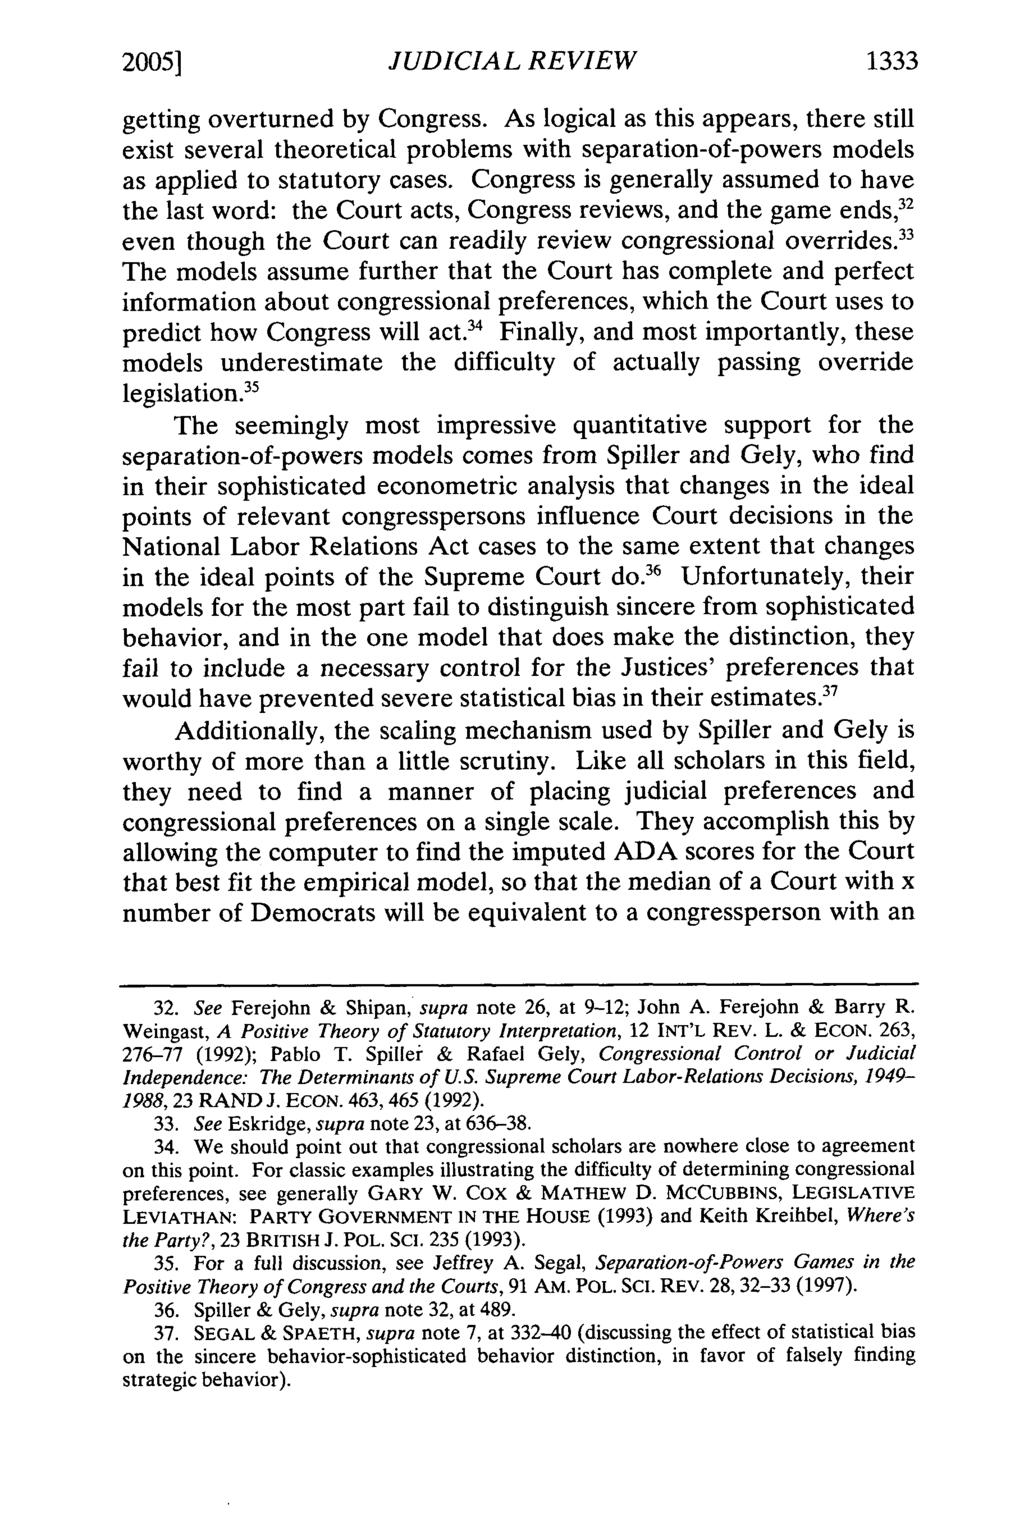 2005] JUDICIAL REVIEW 1333 getting overturned by Congress. As logical as this appears, there still exist several theoretical problems with separation-of-powers models as applied to statutory cases.